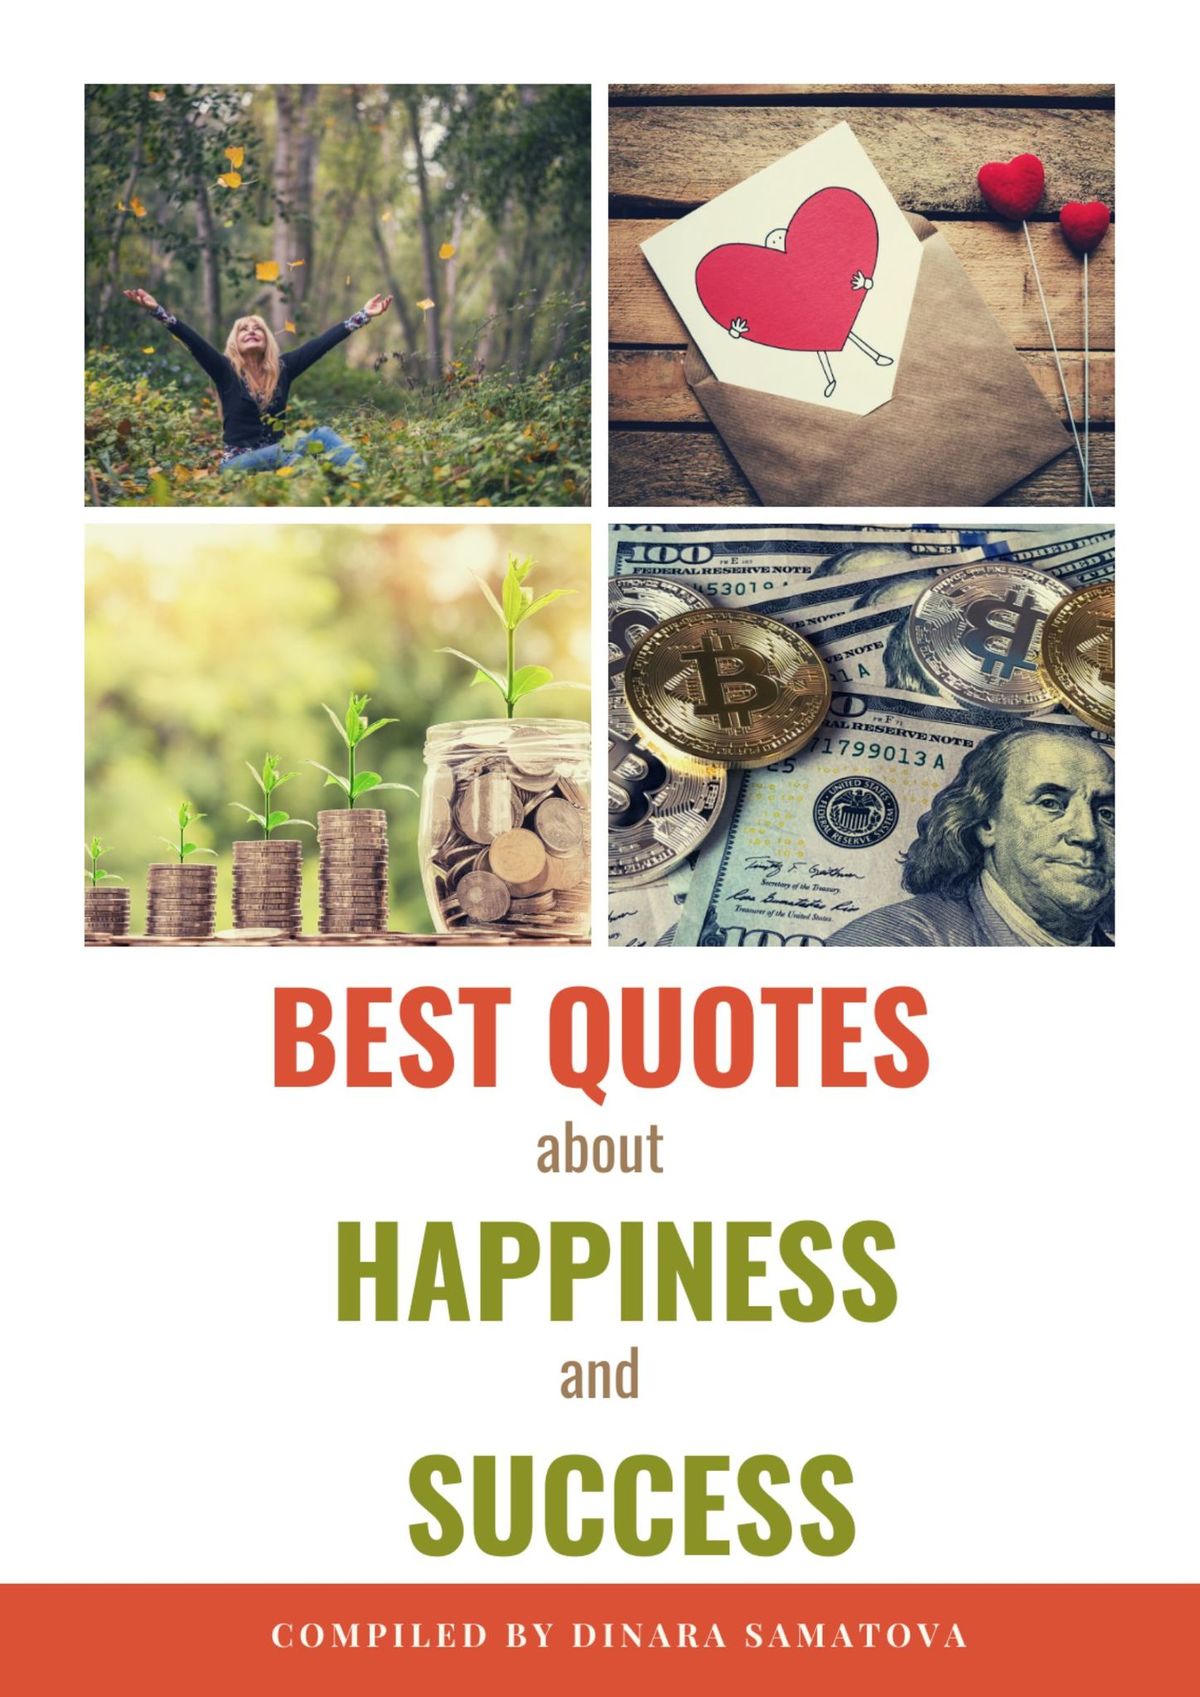 370 Inspiring Thoughts about Happiness and Success. Powerful Tool to Get Motivated Every Day!